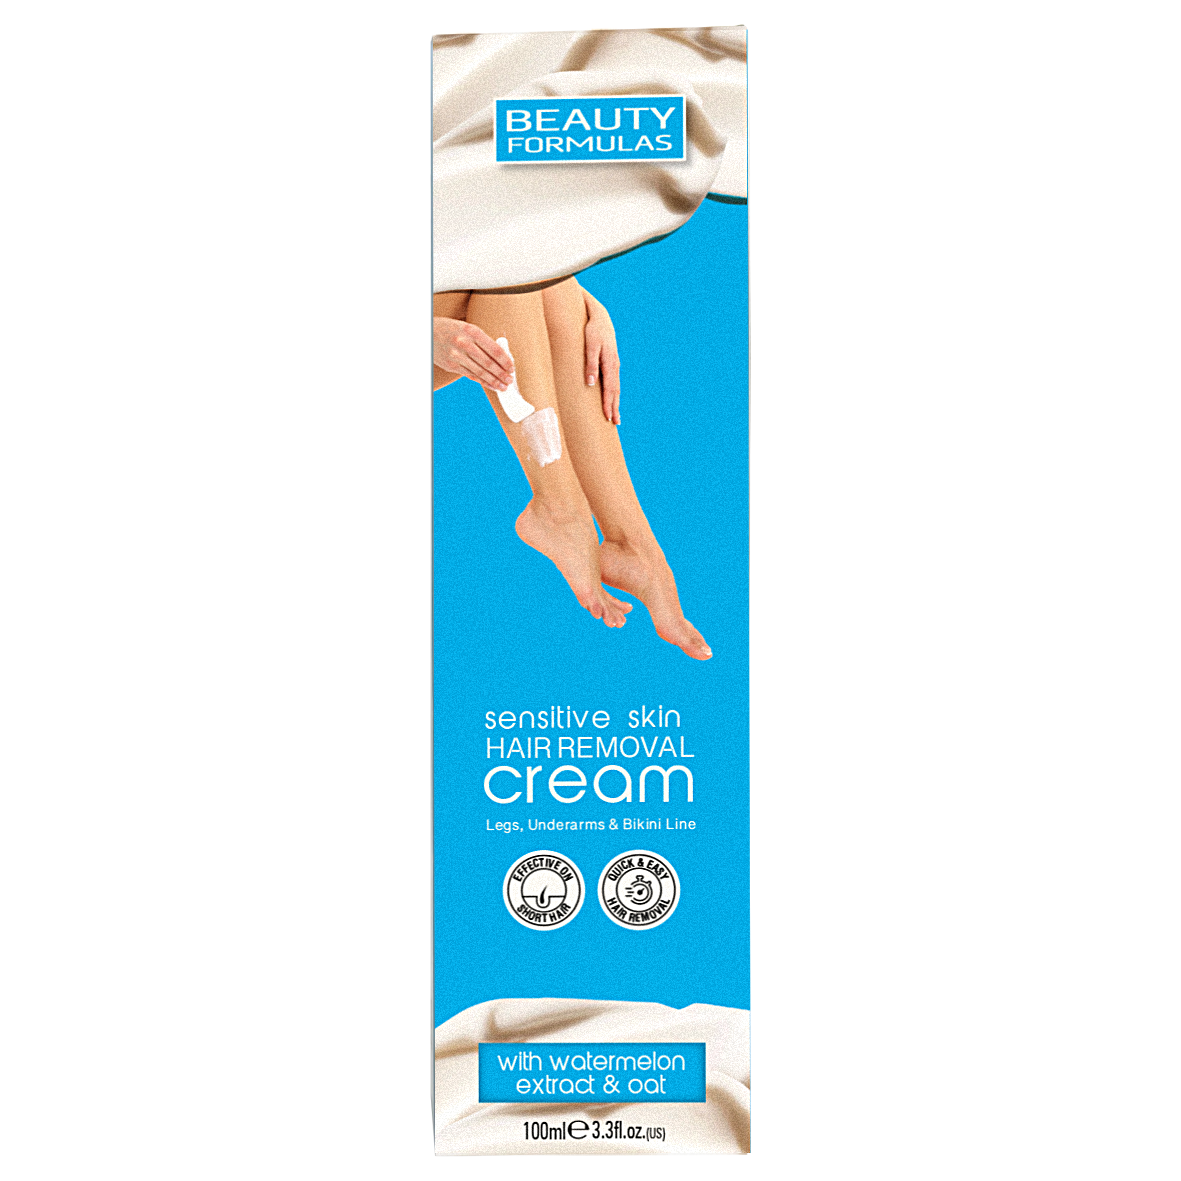 Beauty formulas sensitive skin hair removal cream with watermelon extract and oat.